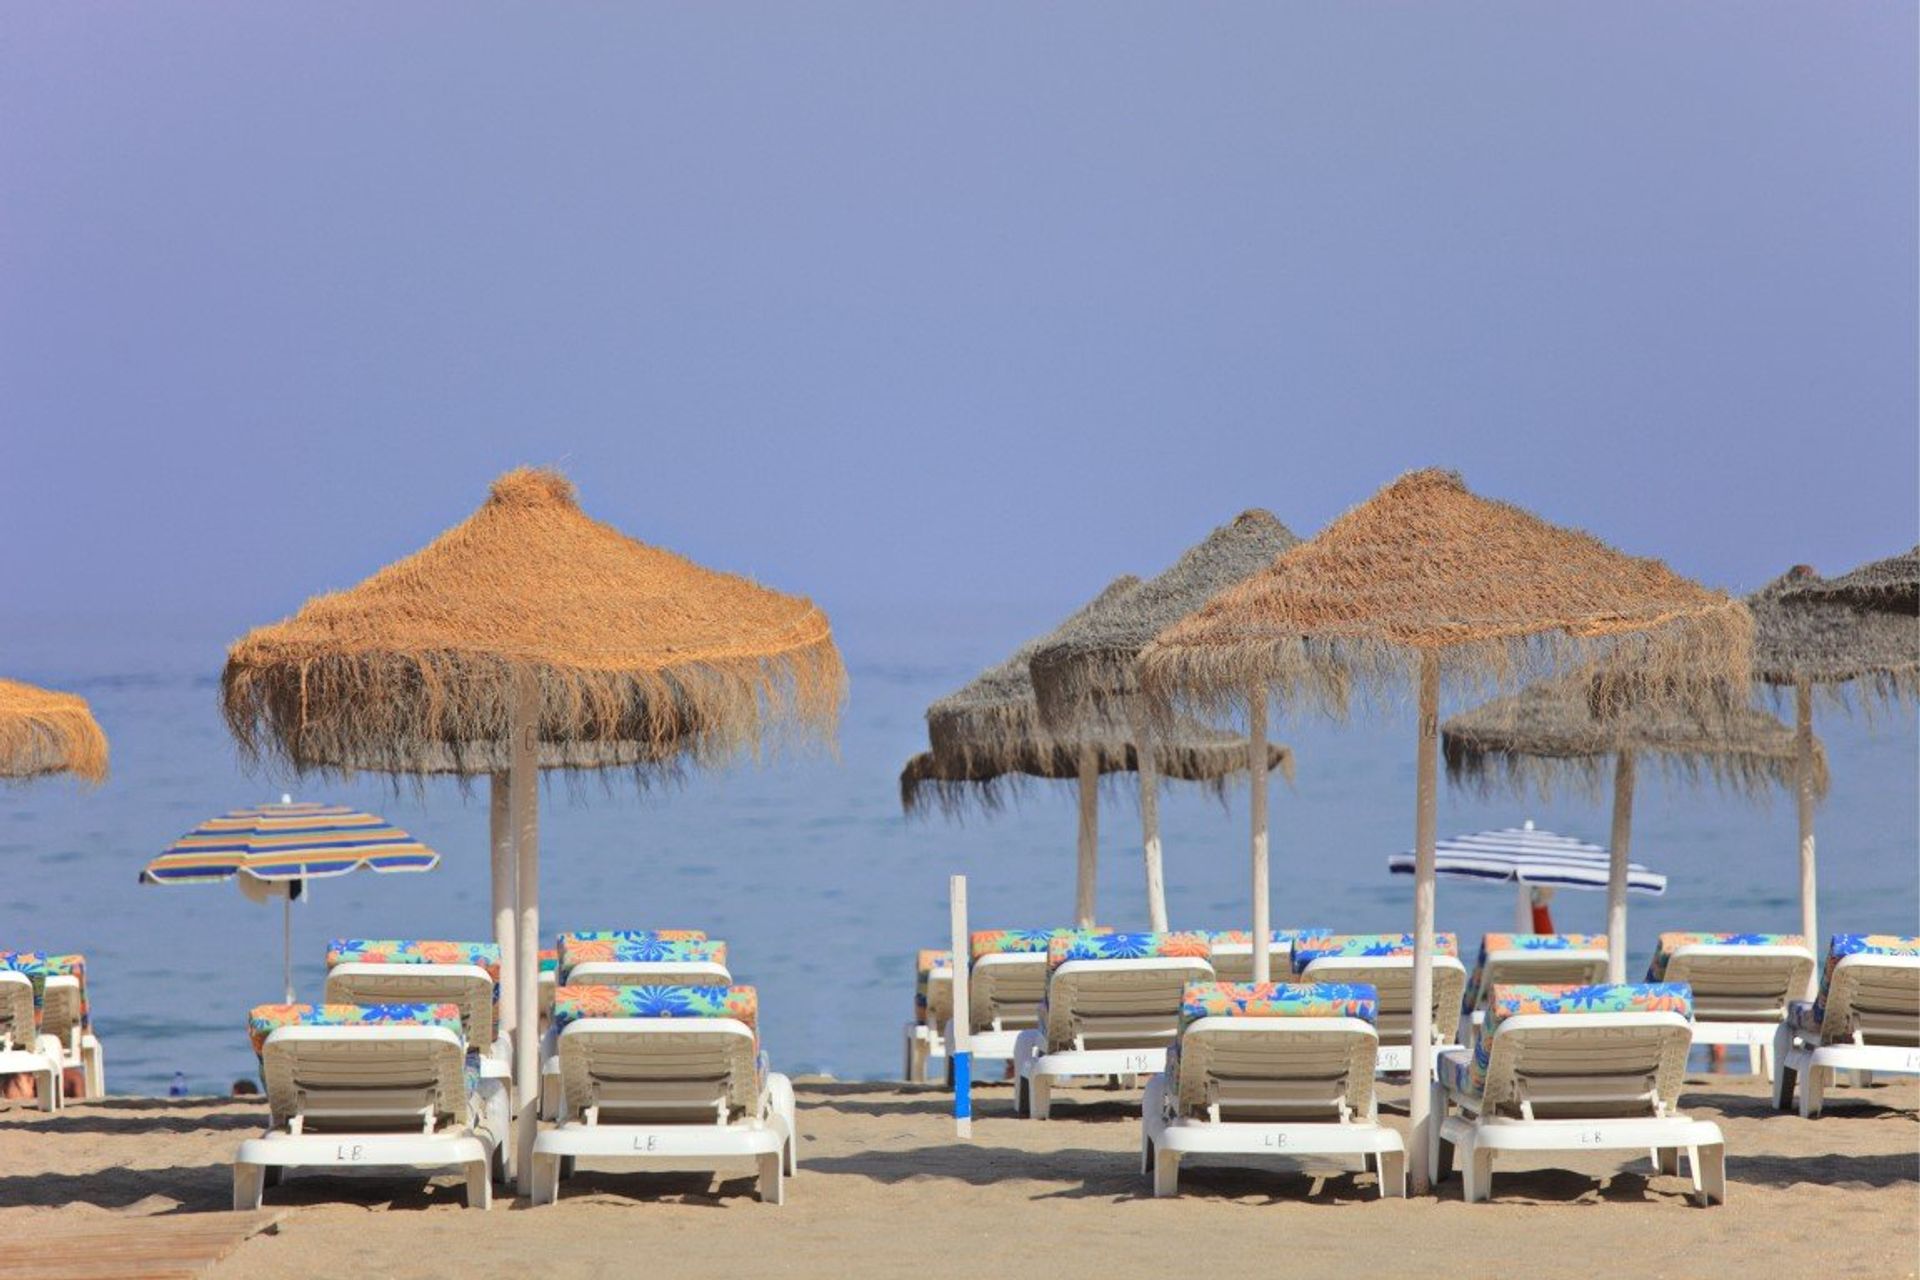 Los Boliches beach is one of the liveliest in Fuengirola district, offering a wide variety of water sports